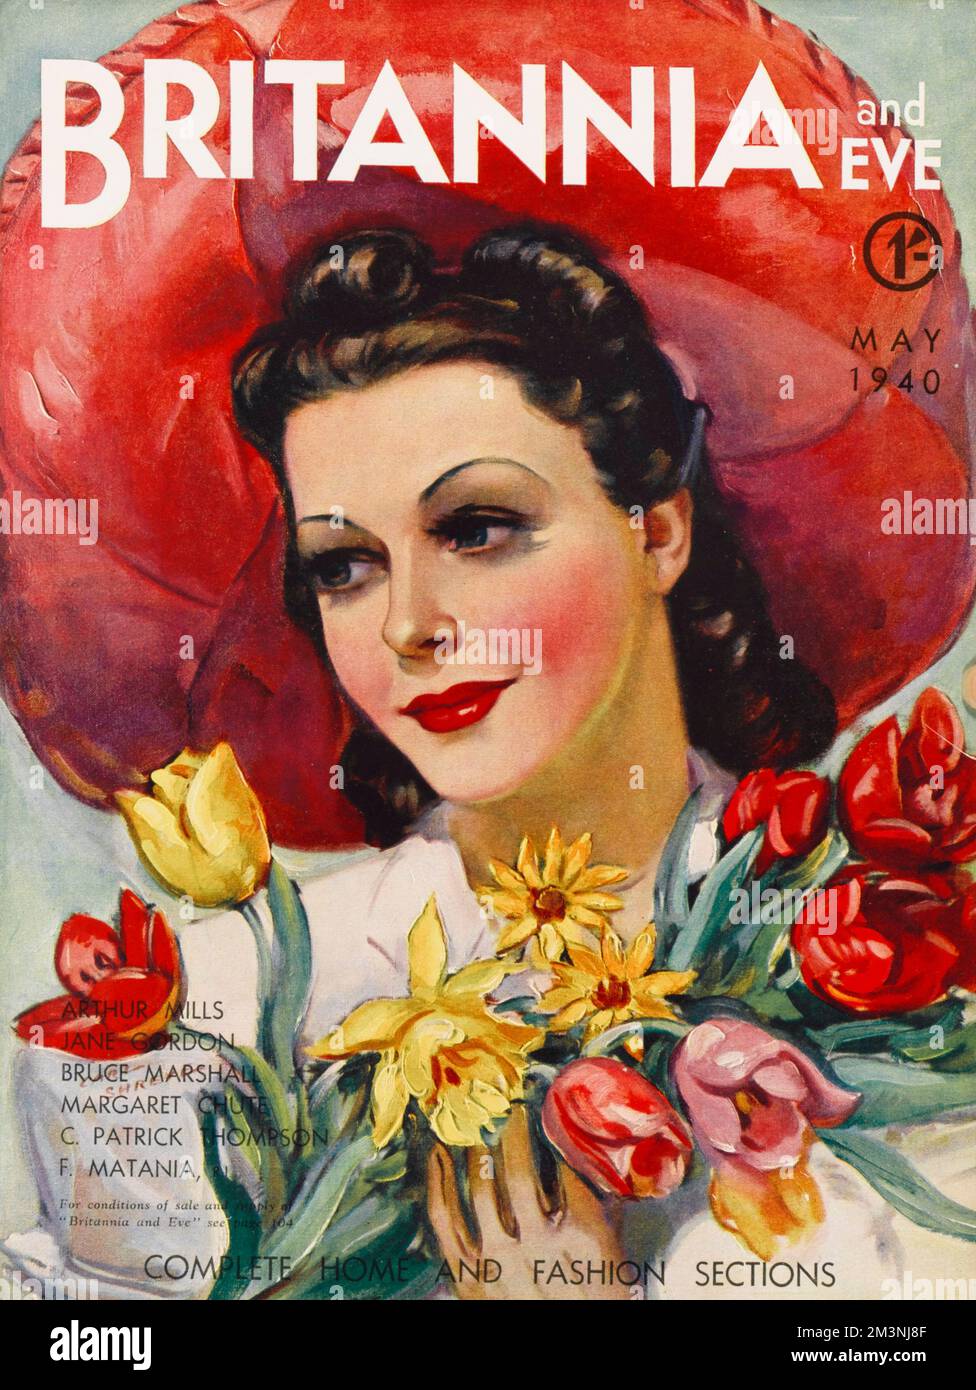 Front cover of Britannia and Eve magazine featuring a woman with glossy brown hair and red lipstick wearing a wide brimmed red sombrero style hat and holding a bunch of spring flowers.     Date: 1940 Stock Photo